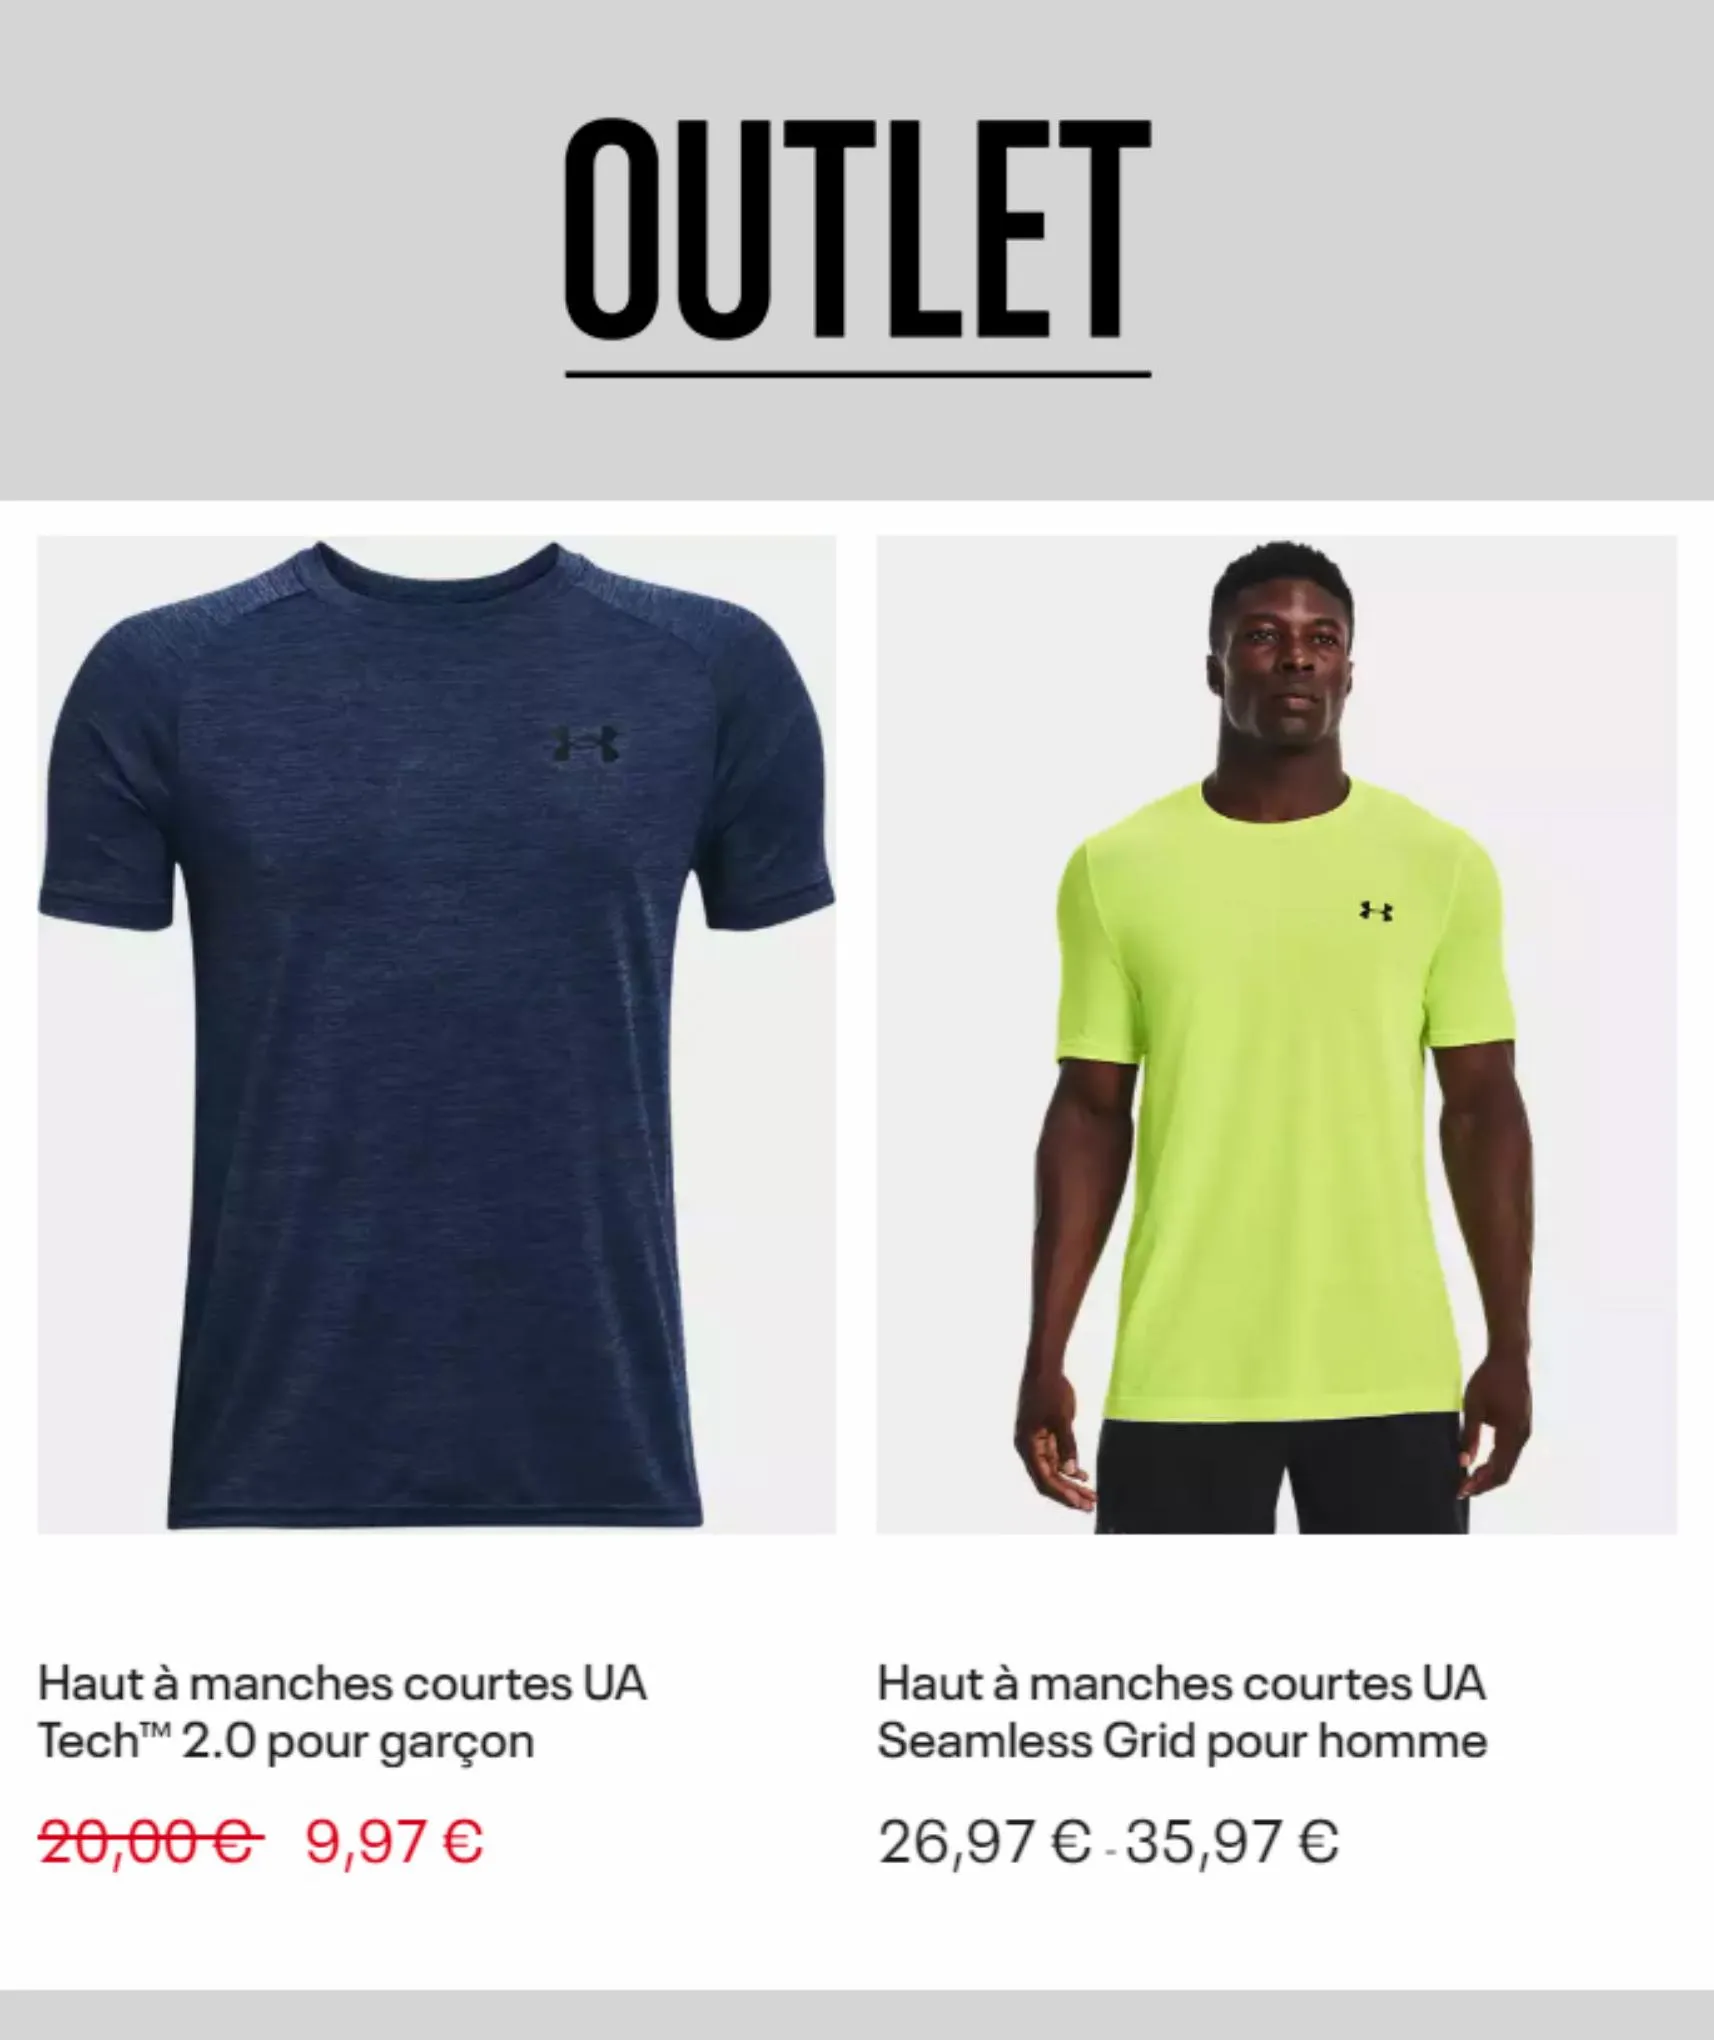 Catalogue Outlet Under Armour, page 00002